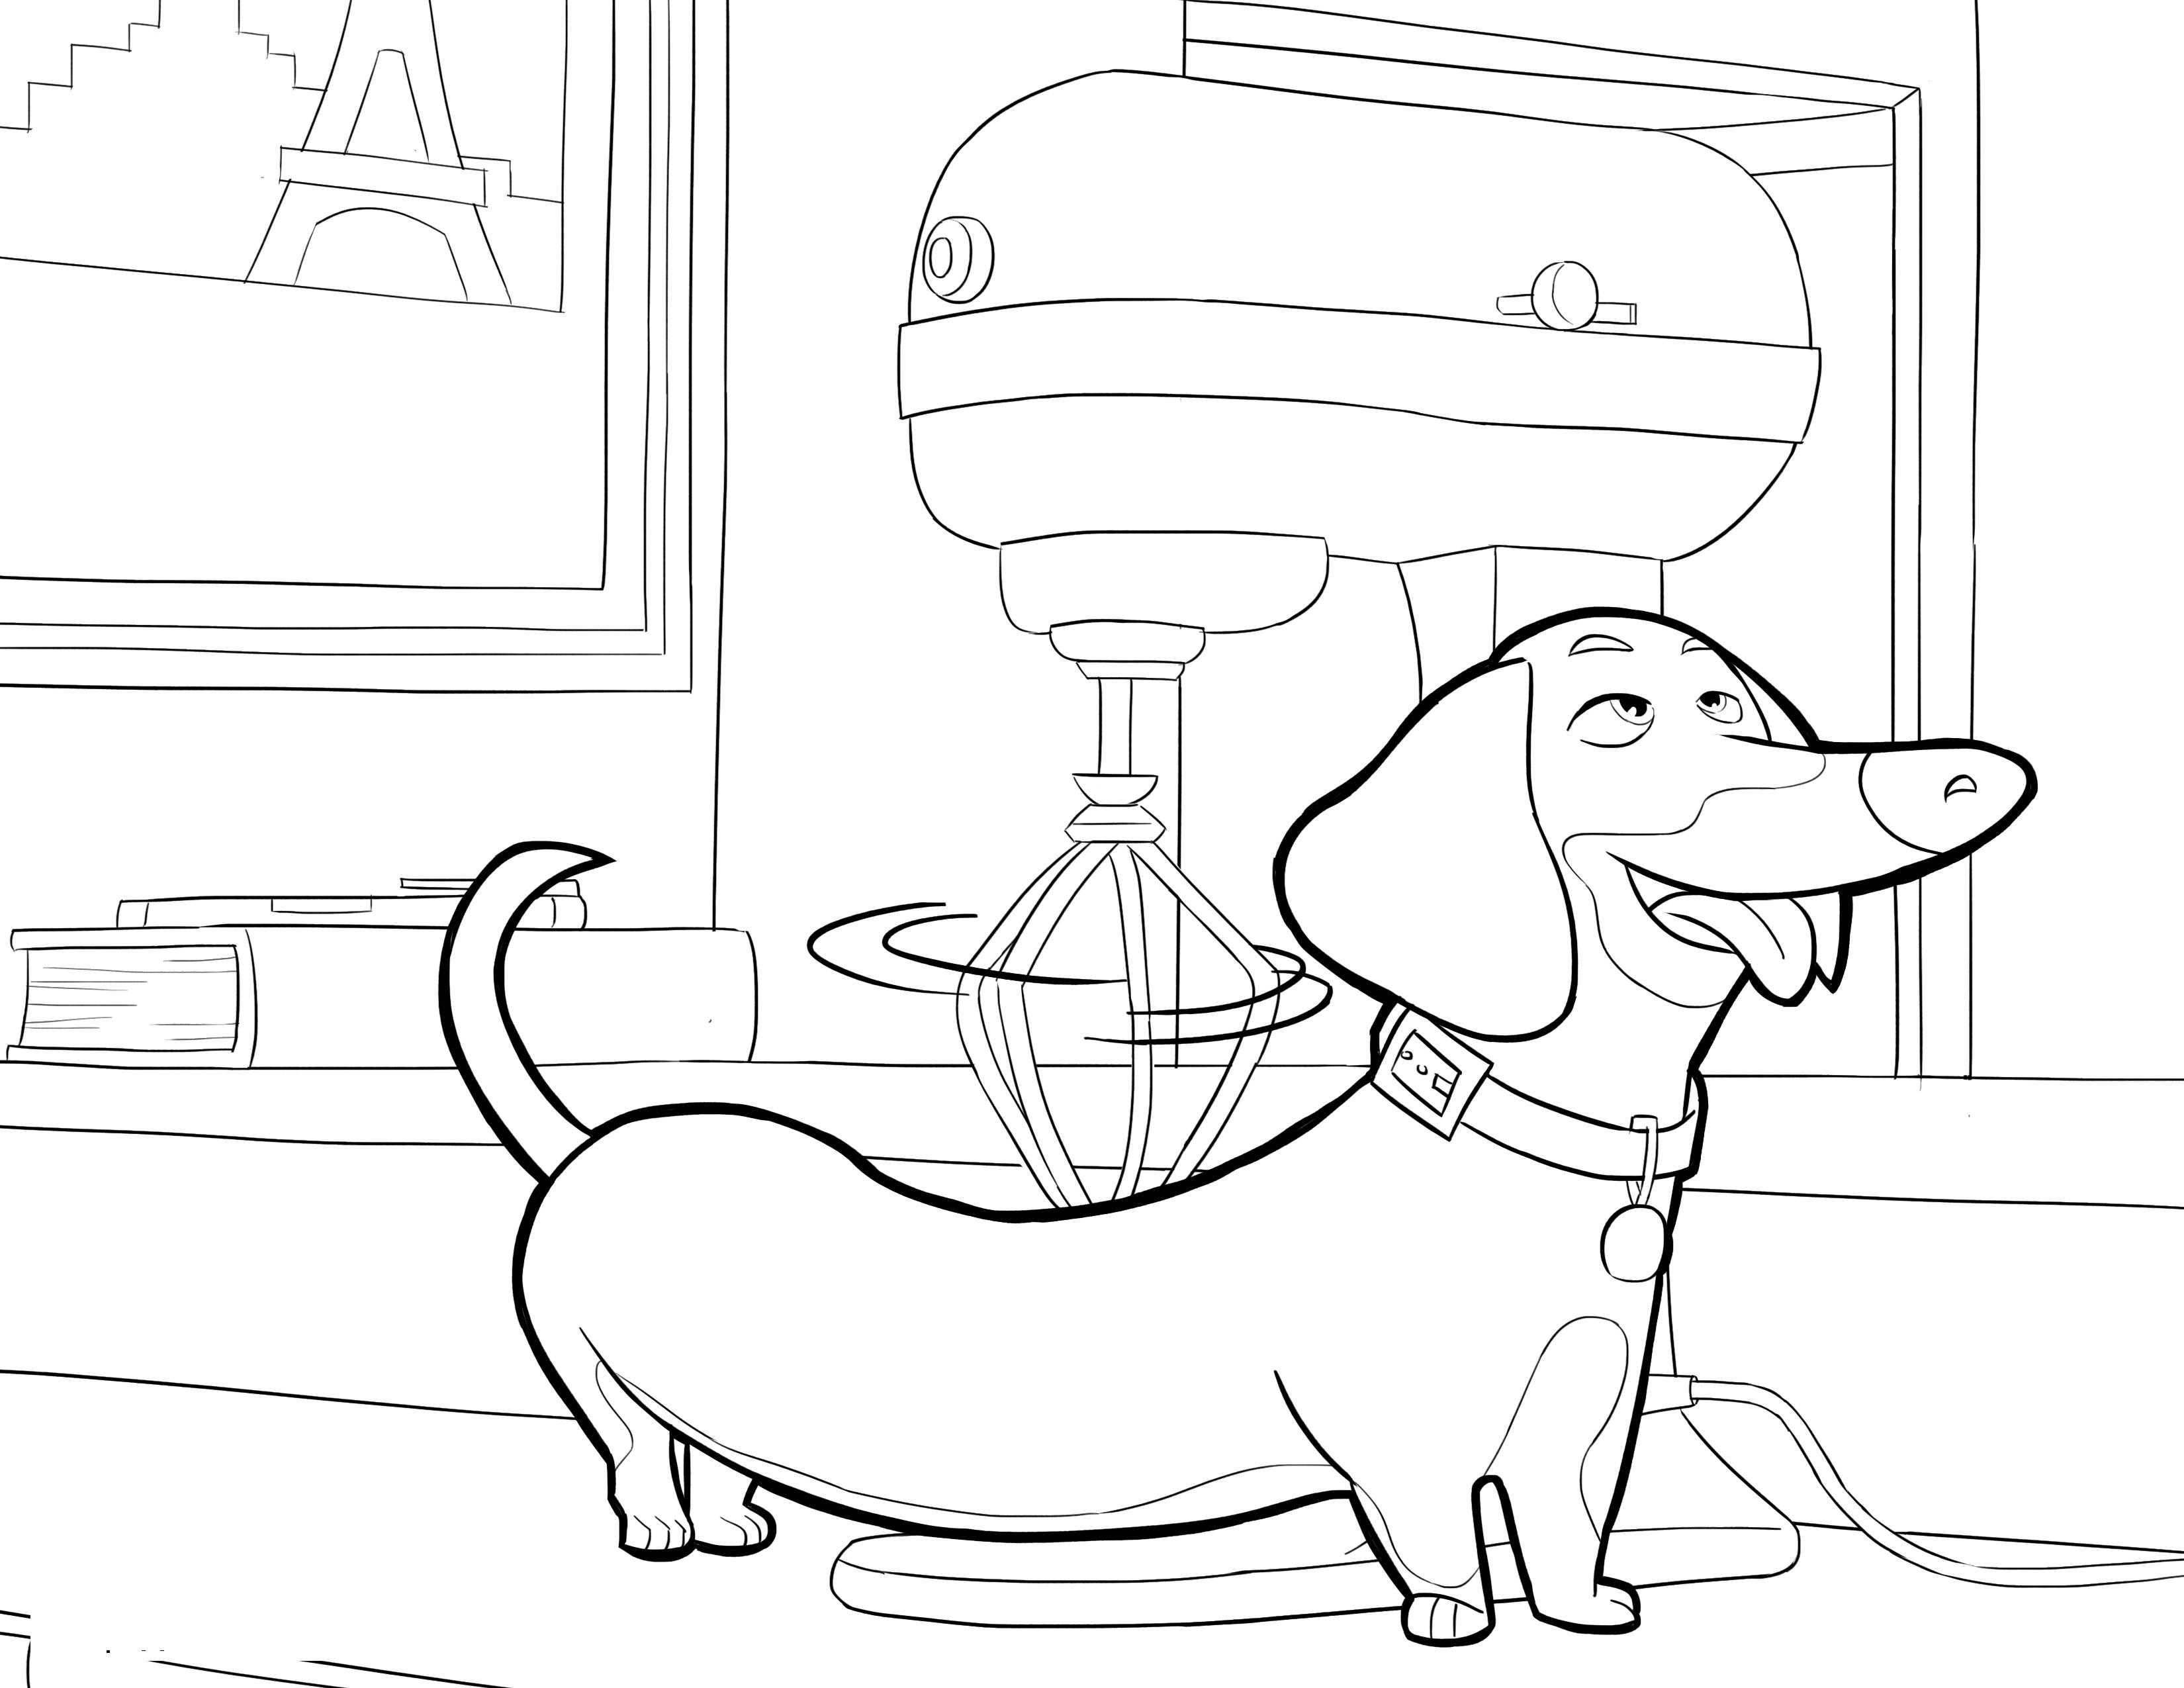 Coloring Dachshund in the kitchen. Category Pets allowed. Tags:  dog, Dachshund.